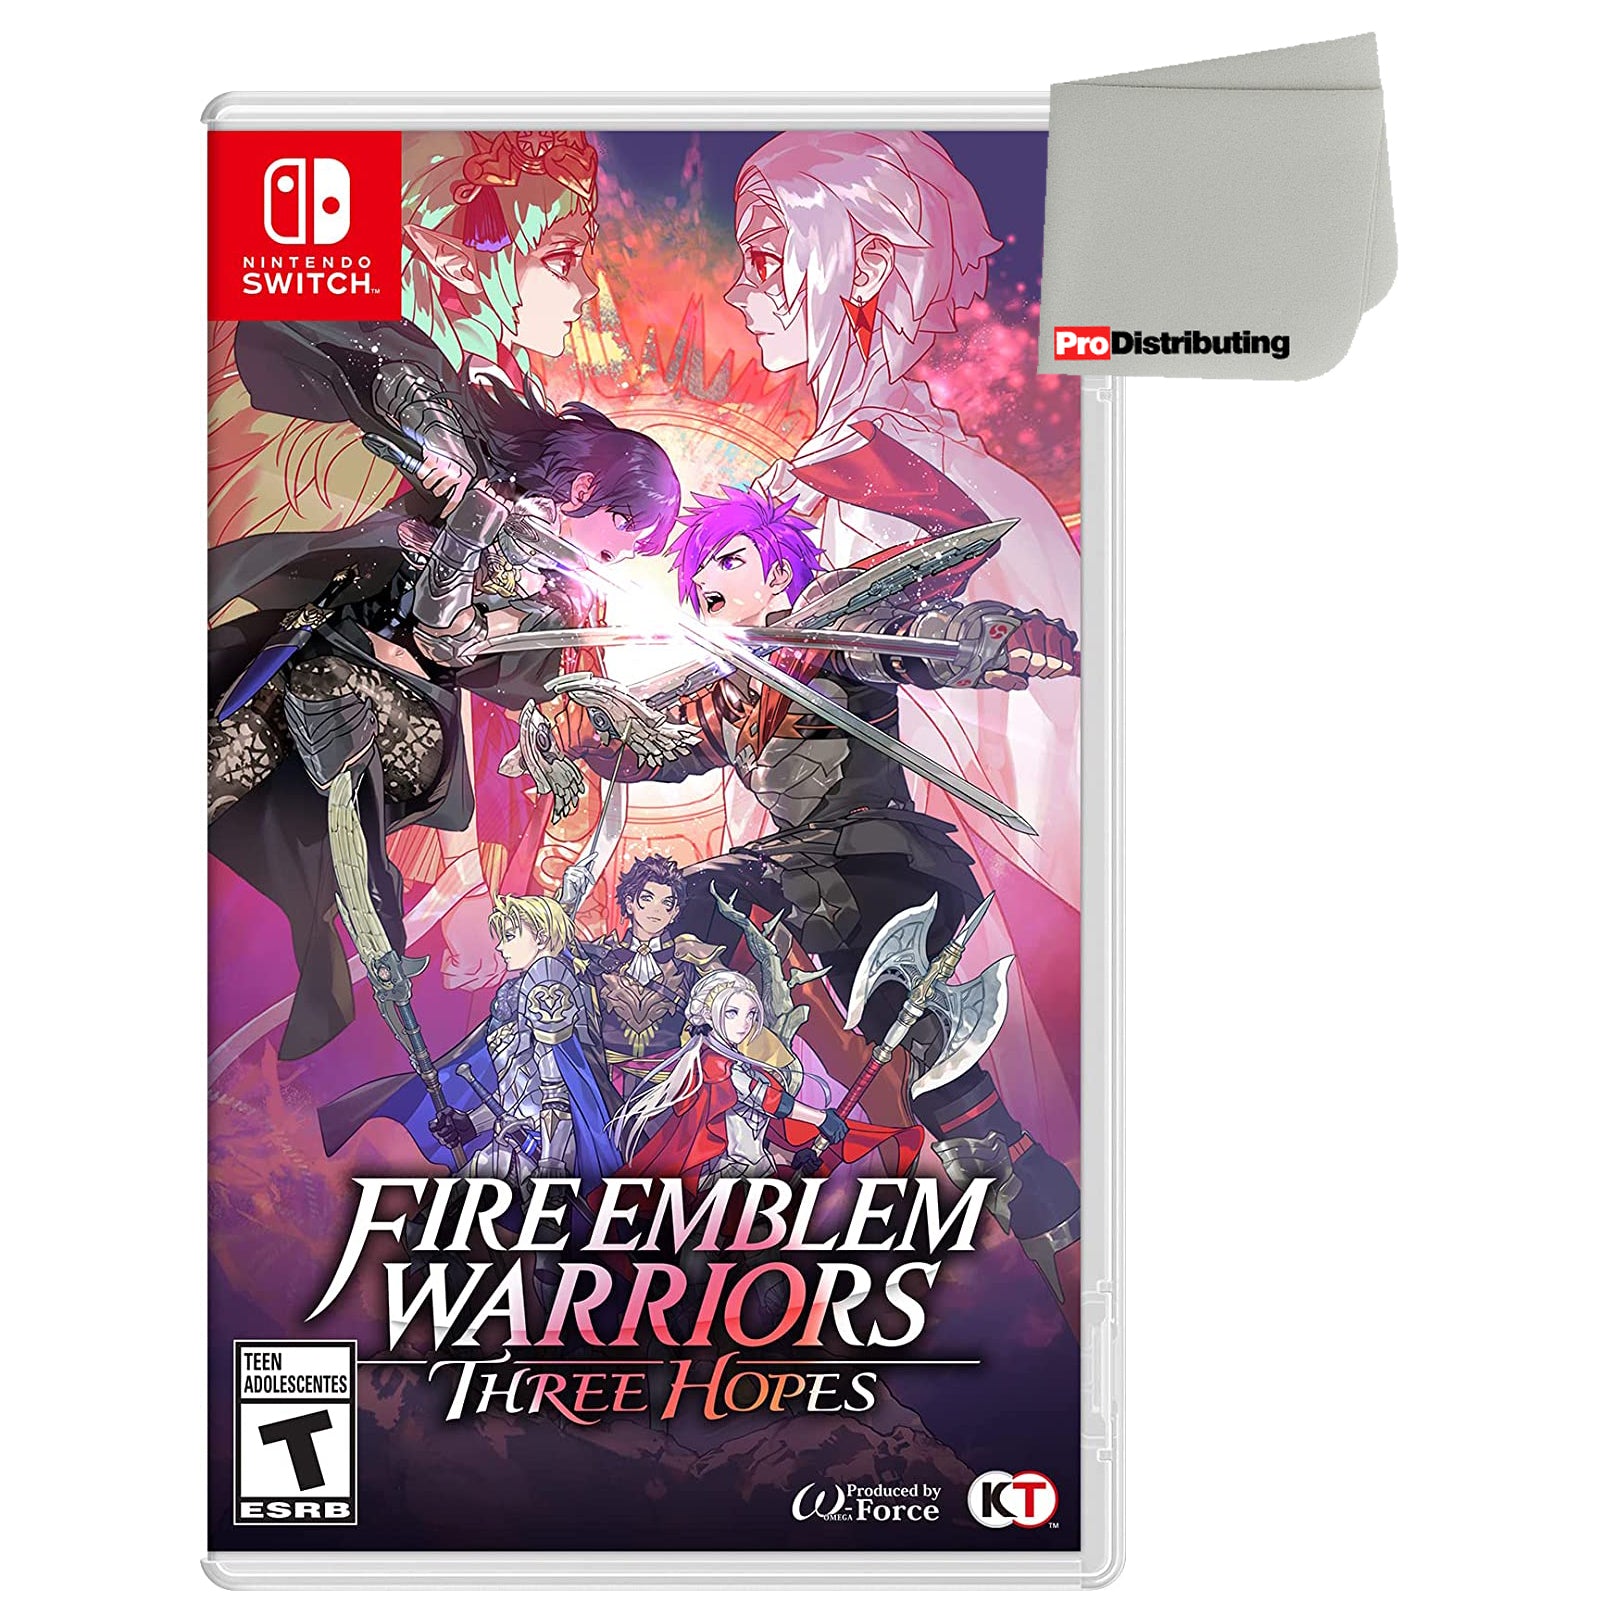 Fire Emblem Warriors: Three Hopes - Nintendo Switch with Screen Cleaning Cloth - Pro-Distributing